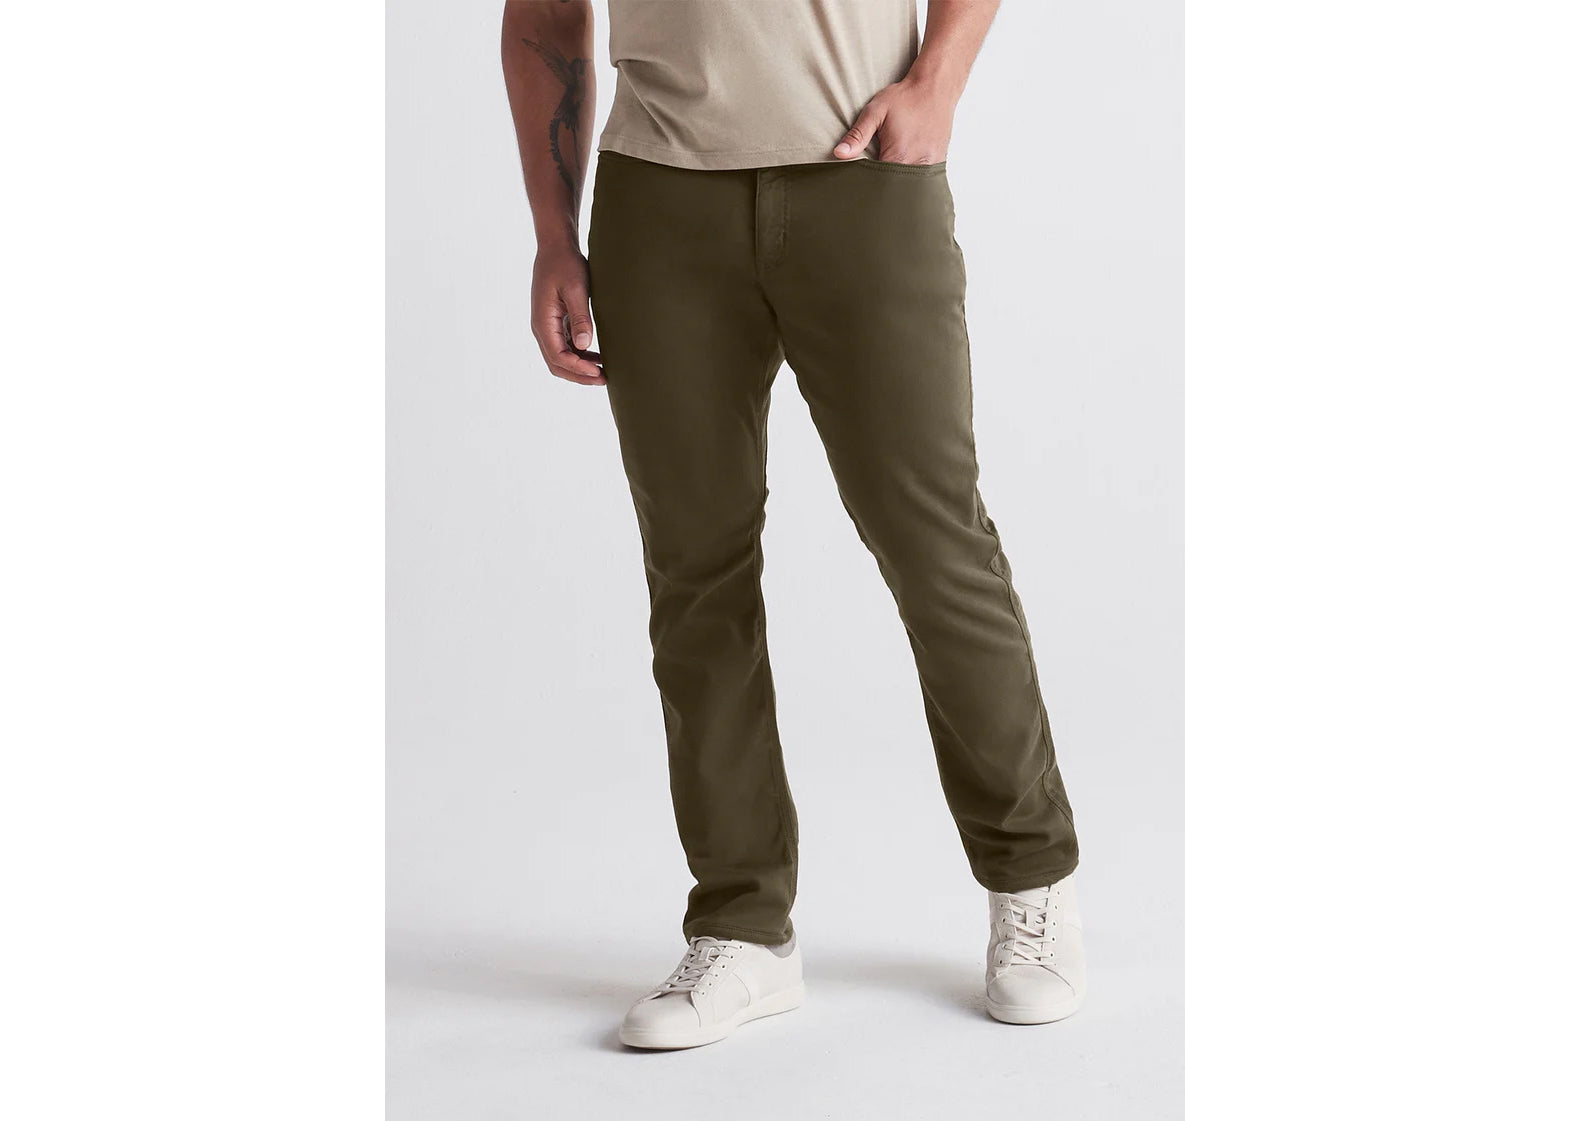 DU/ER No Sweat Pants Relaxed Fit Review